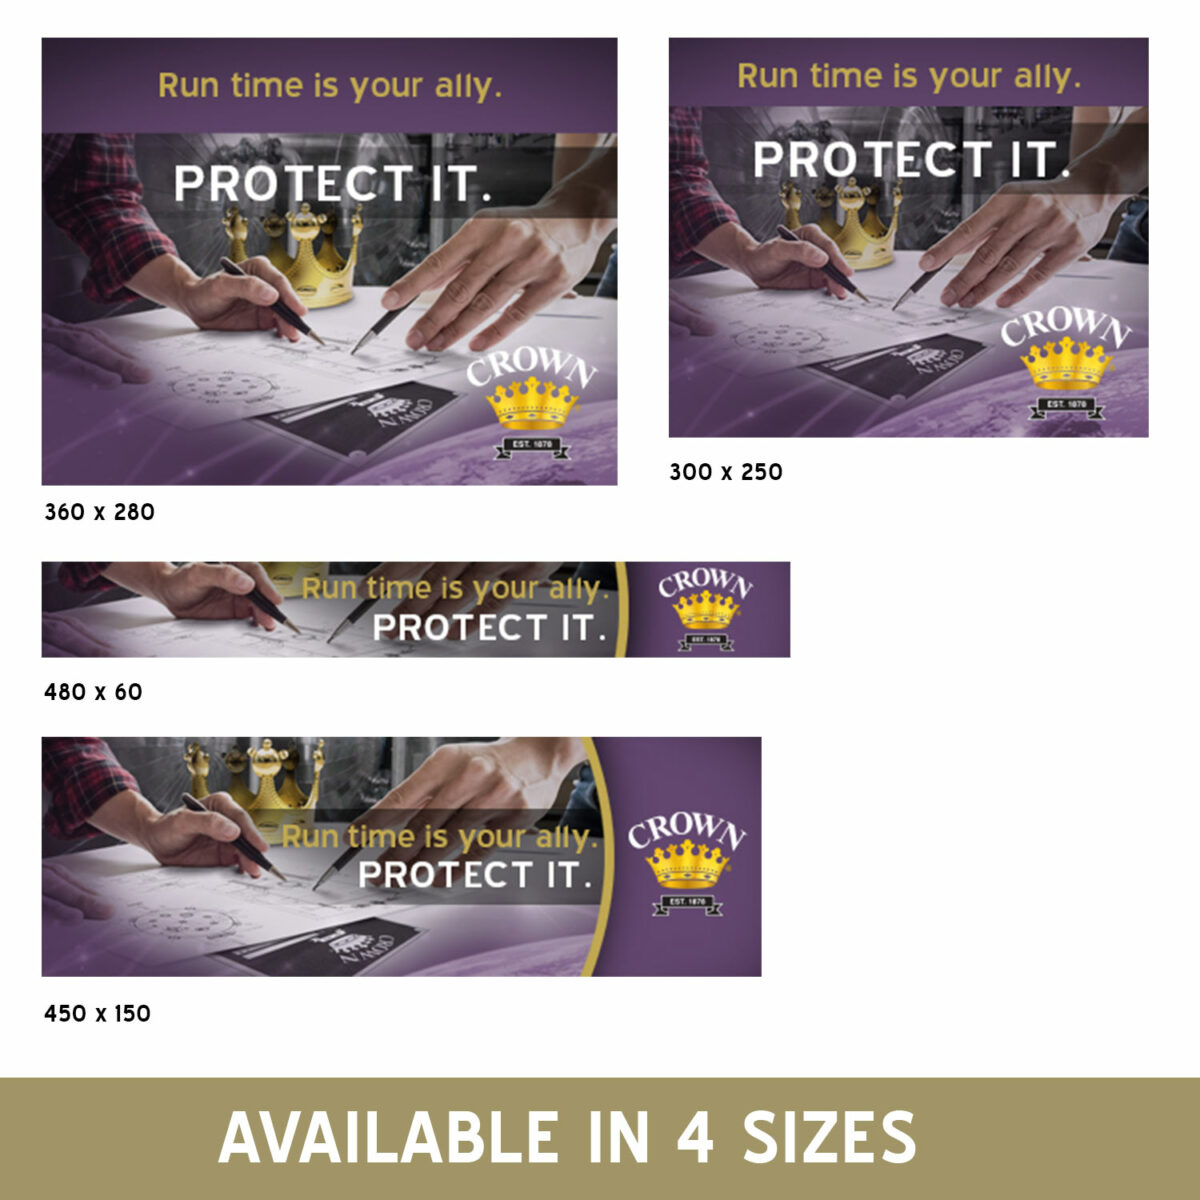 Crown Protect It Banner Ads